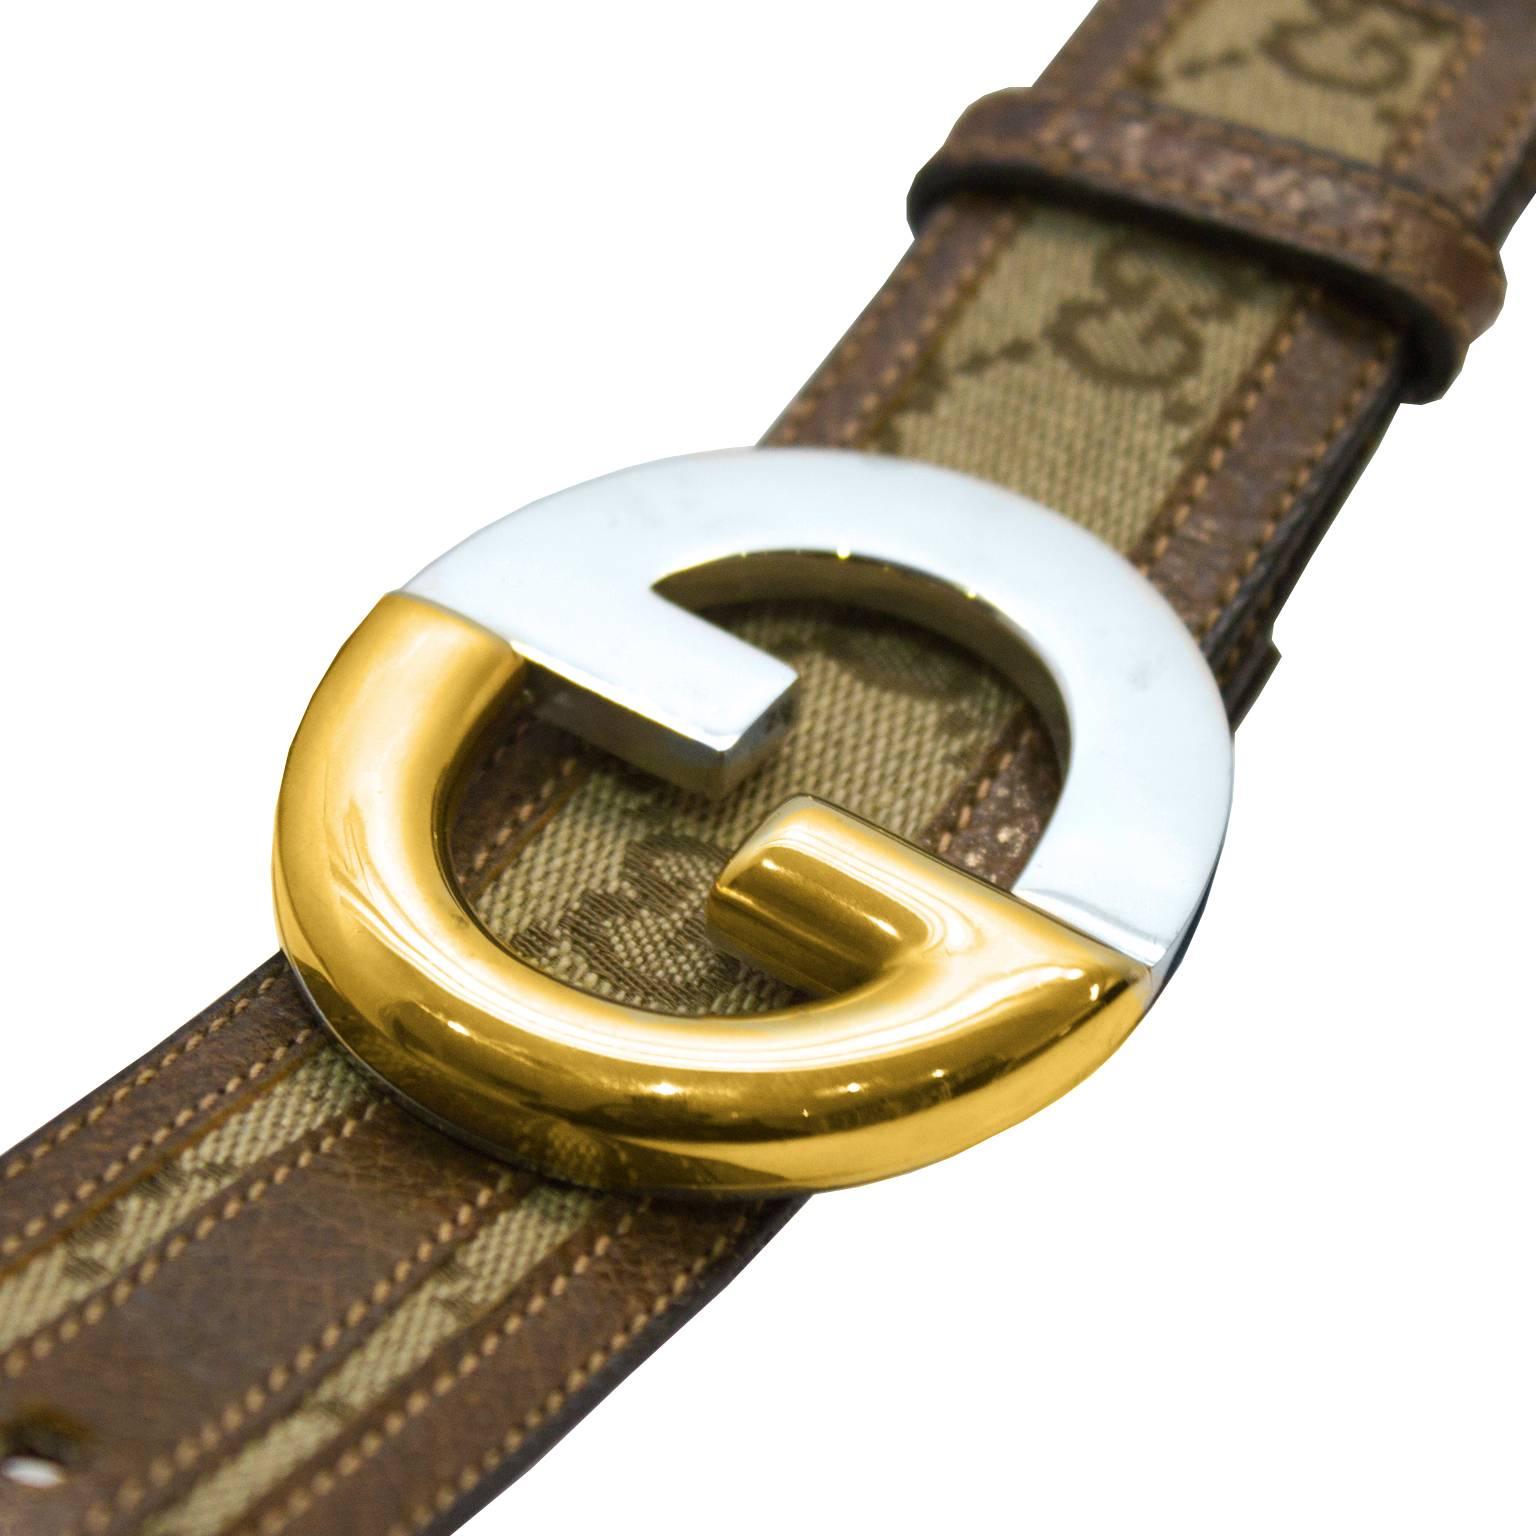 Classic Gucci canvas monogram belt from the 1970's featuring it's iconic print throughout, a GG belt buckle in goldtone and silver metal and a brown leather interior. Excellent vintage condition.